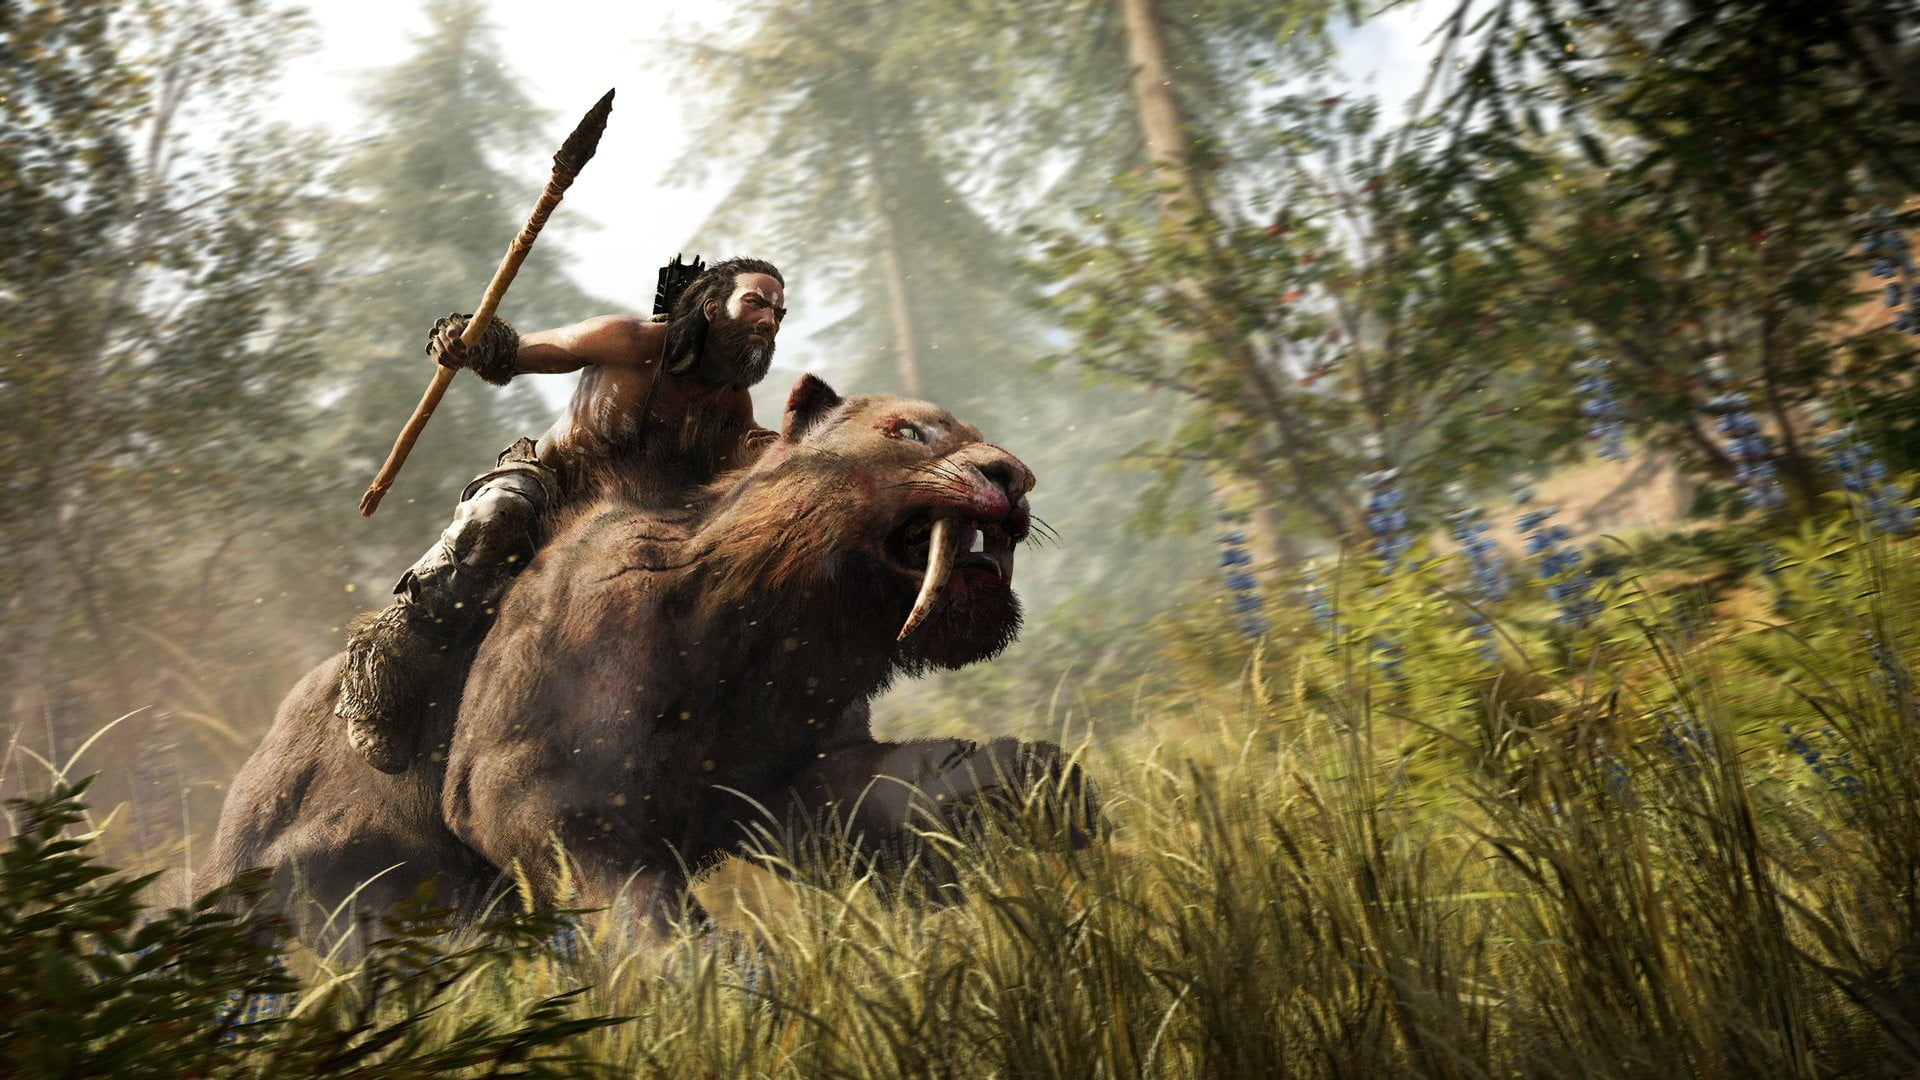 man riding on animal on grass field wallpaper, far cry primal, video games